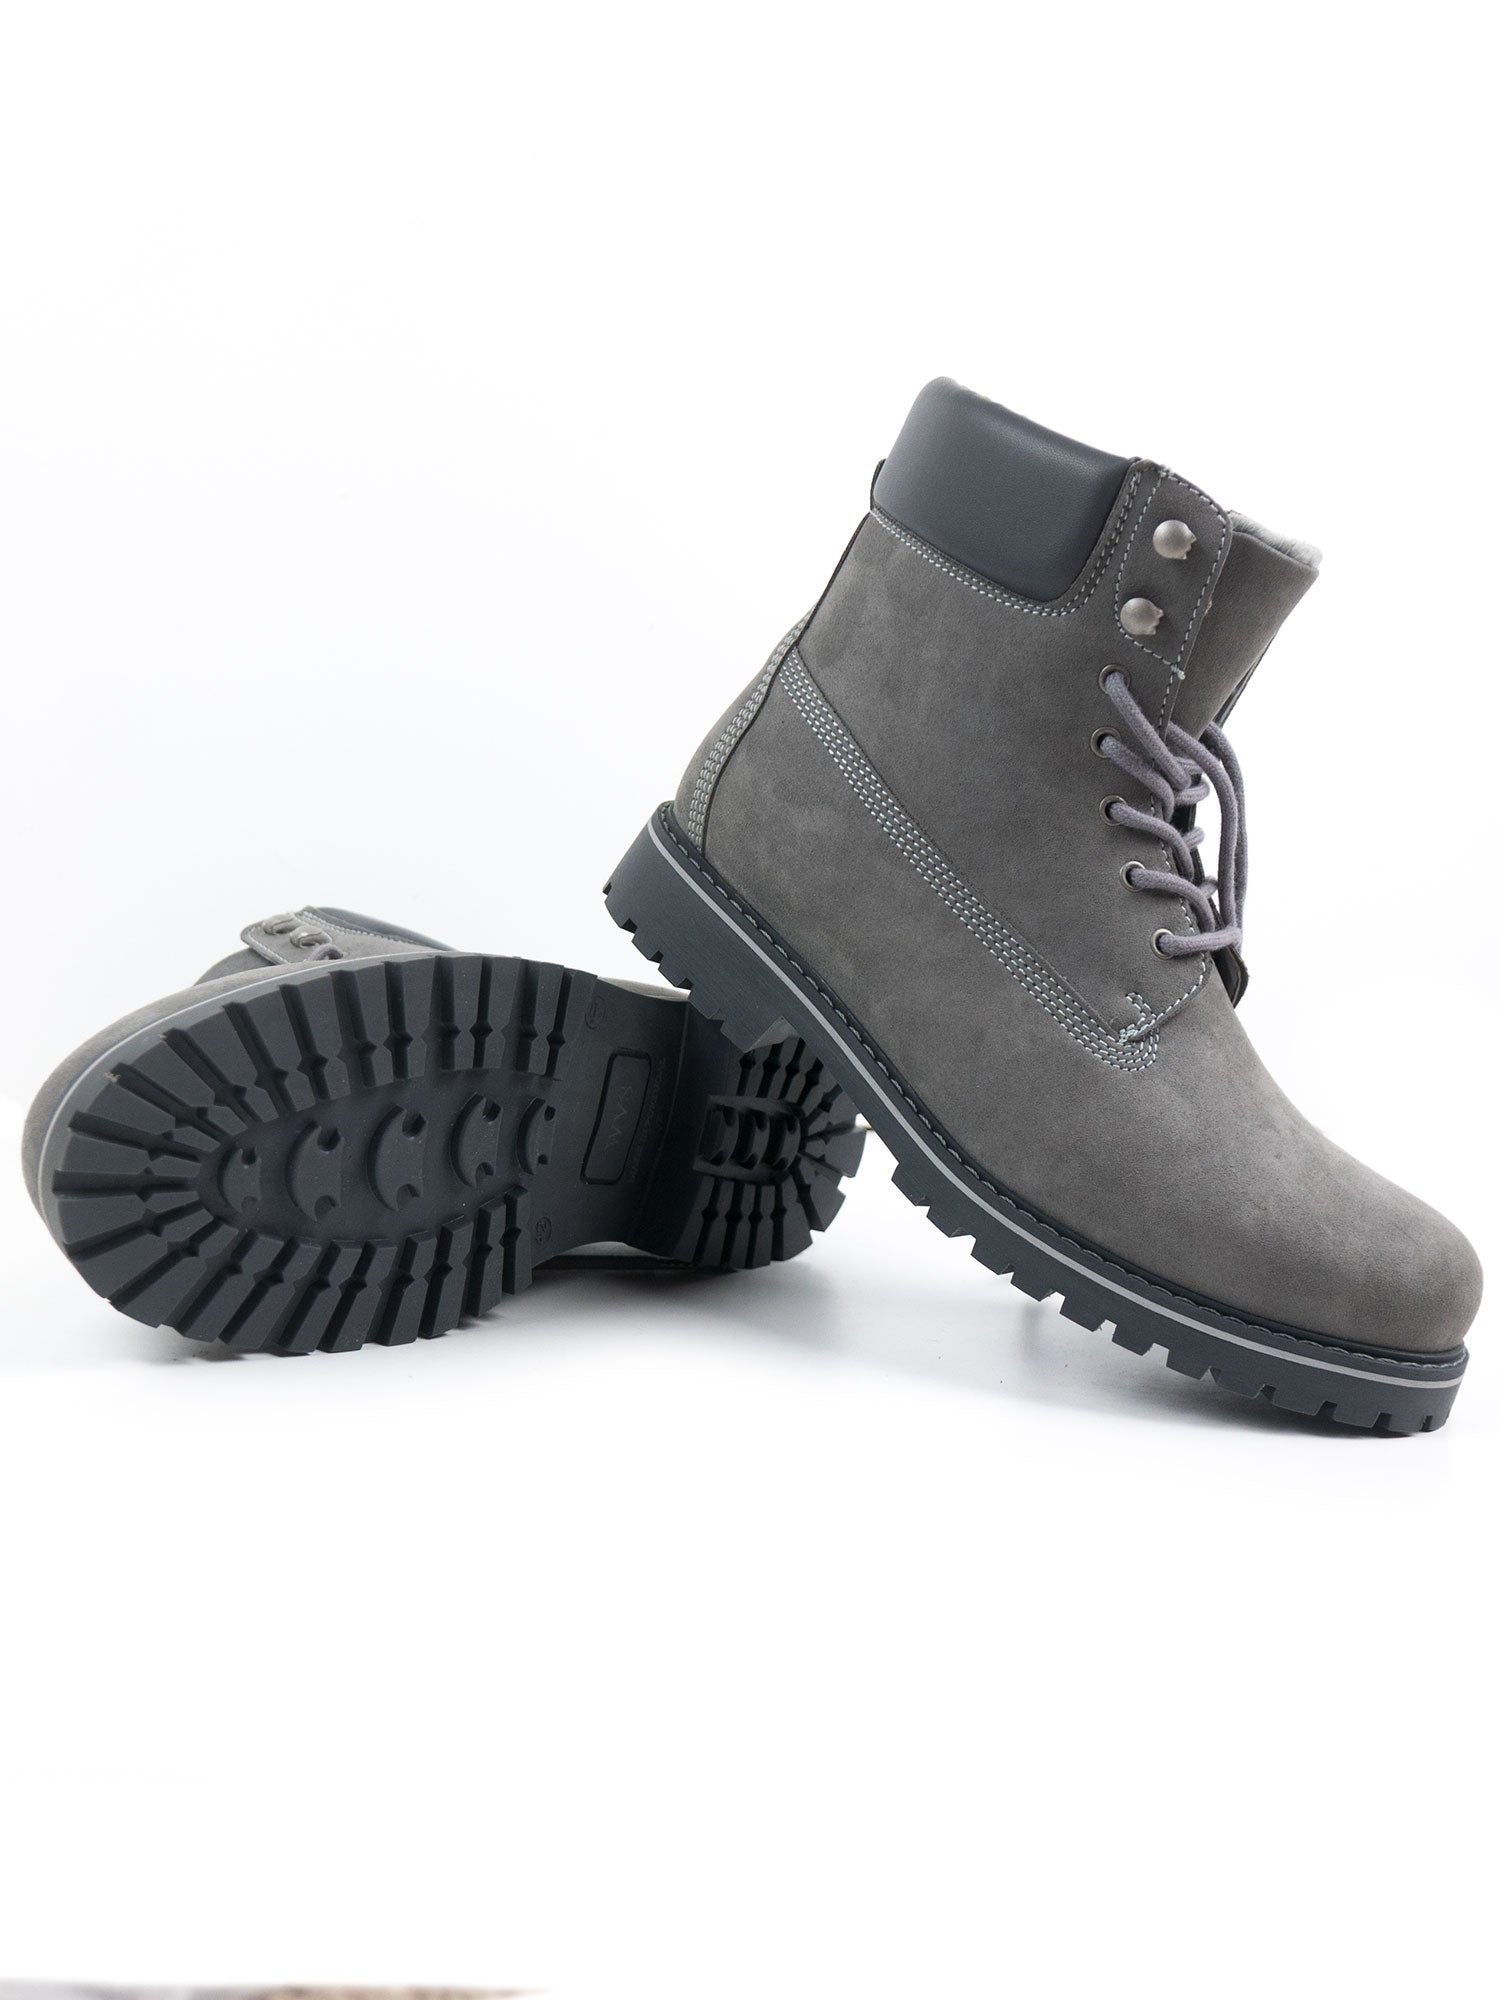 Will's Vegan Store Insulated Dock Boots